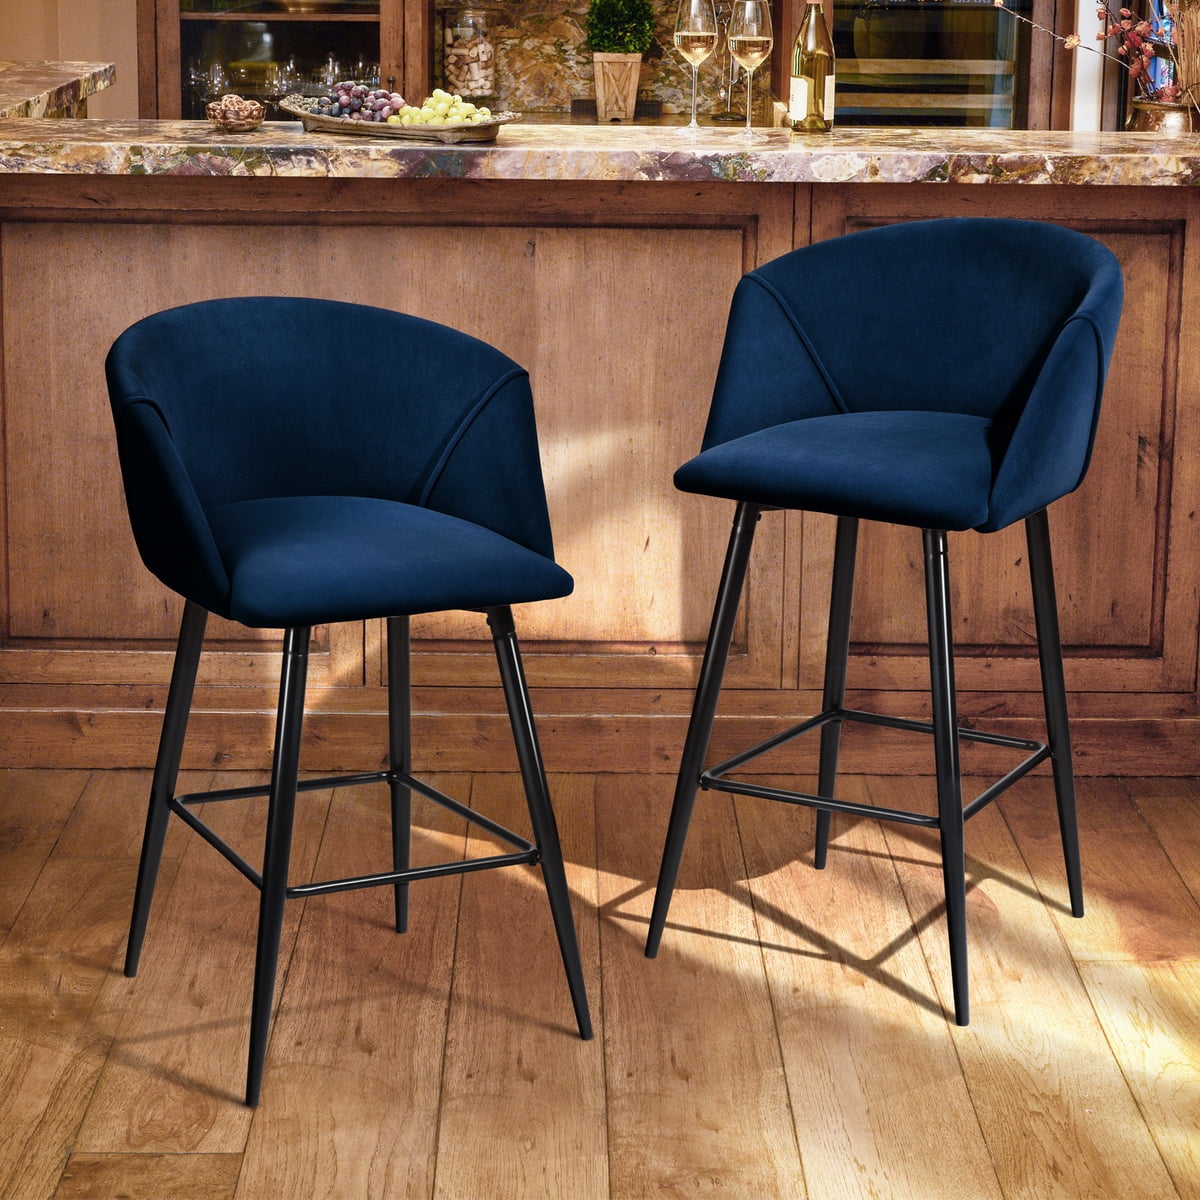 FurnitureR 27-30 INCH Adjustable Seat Height Industrial Bar Stools Set of 2 Walnut Counter Height Bar Stools 360 Degree Swivel Seat Barstools for Home Bar Furniture